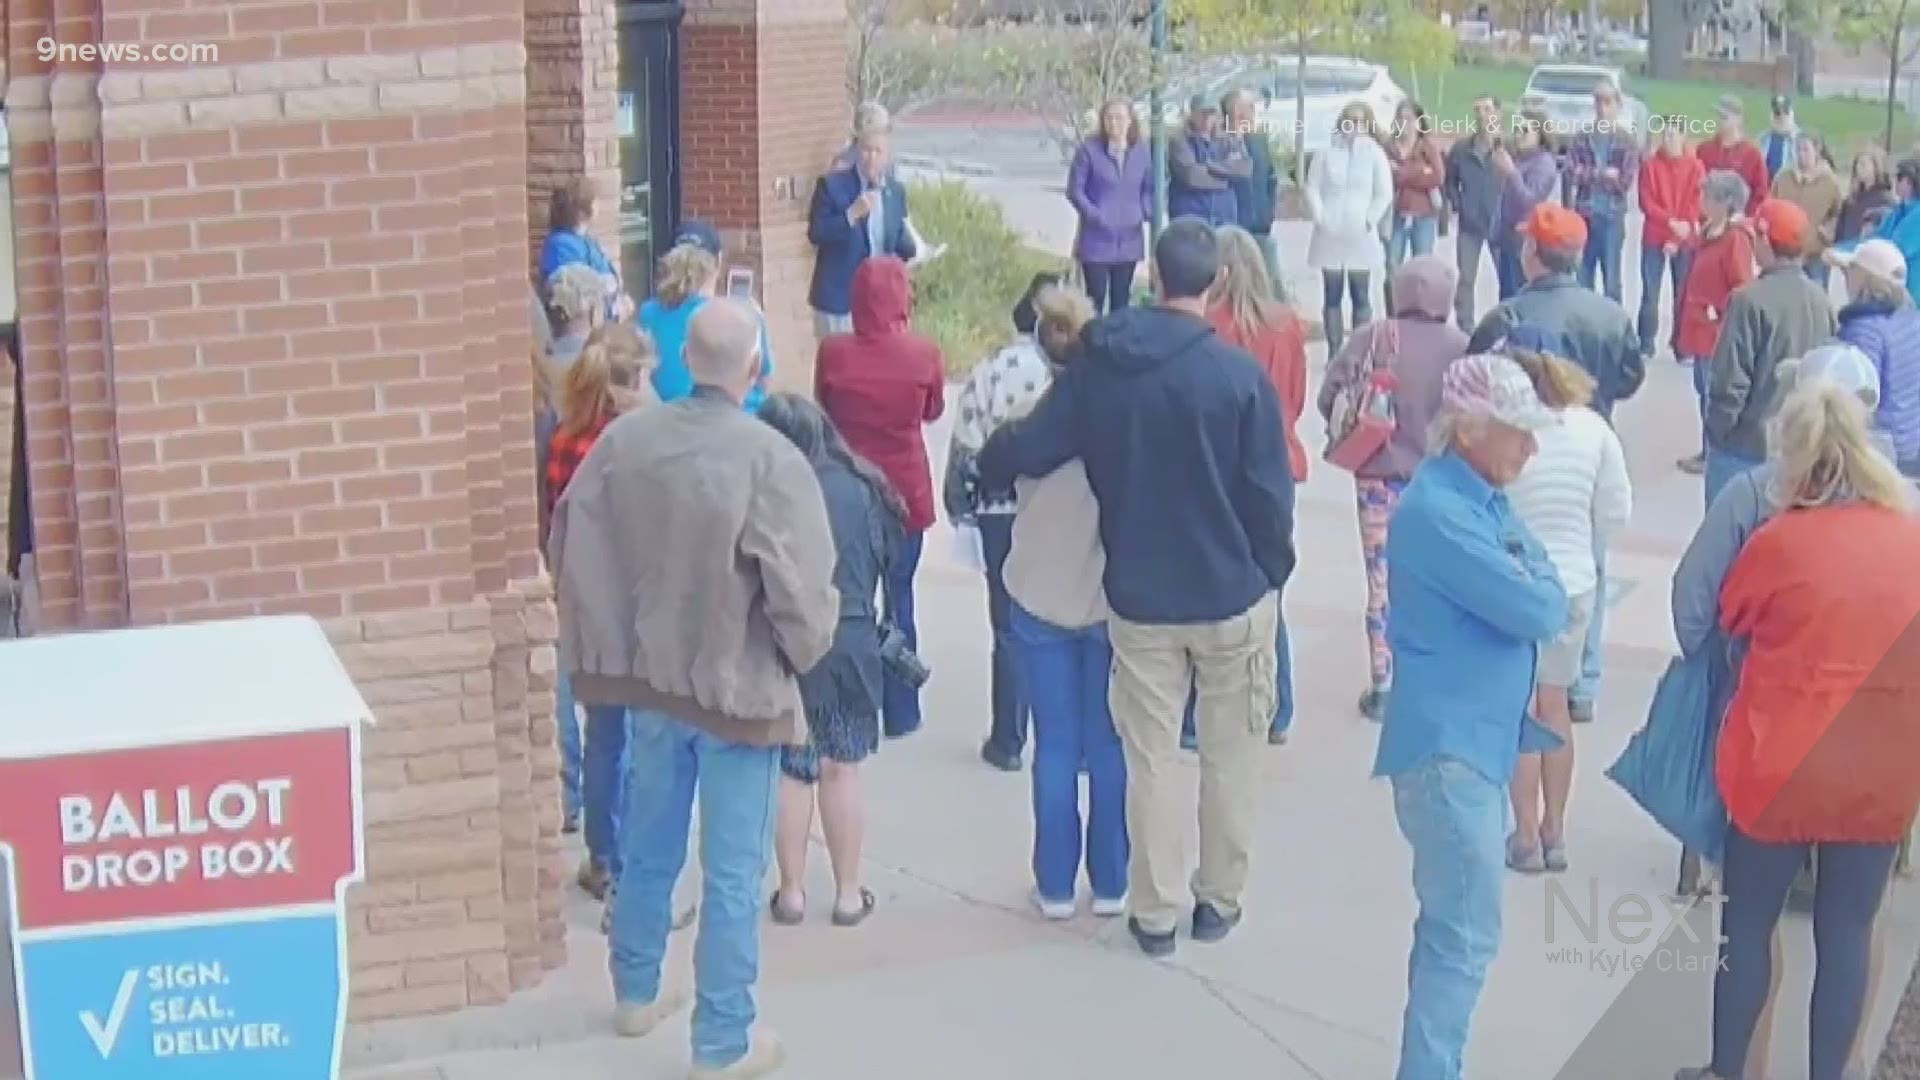 A group gathered over the weekend to protest Colorado's mask mandate and business restrictions near a ballot drop box in Larimer County.